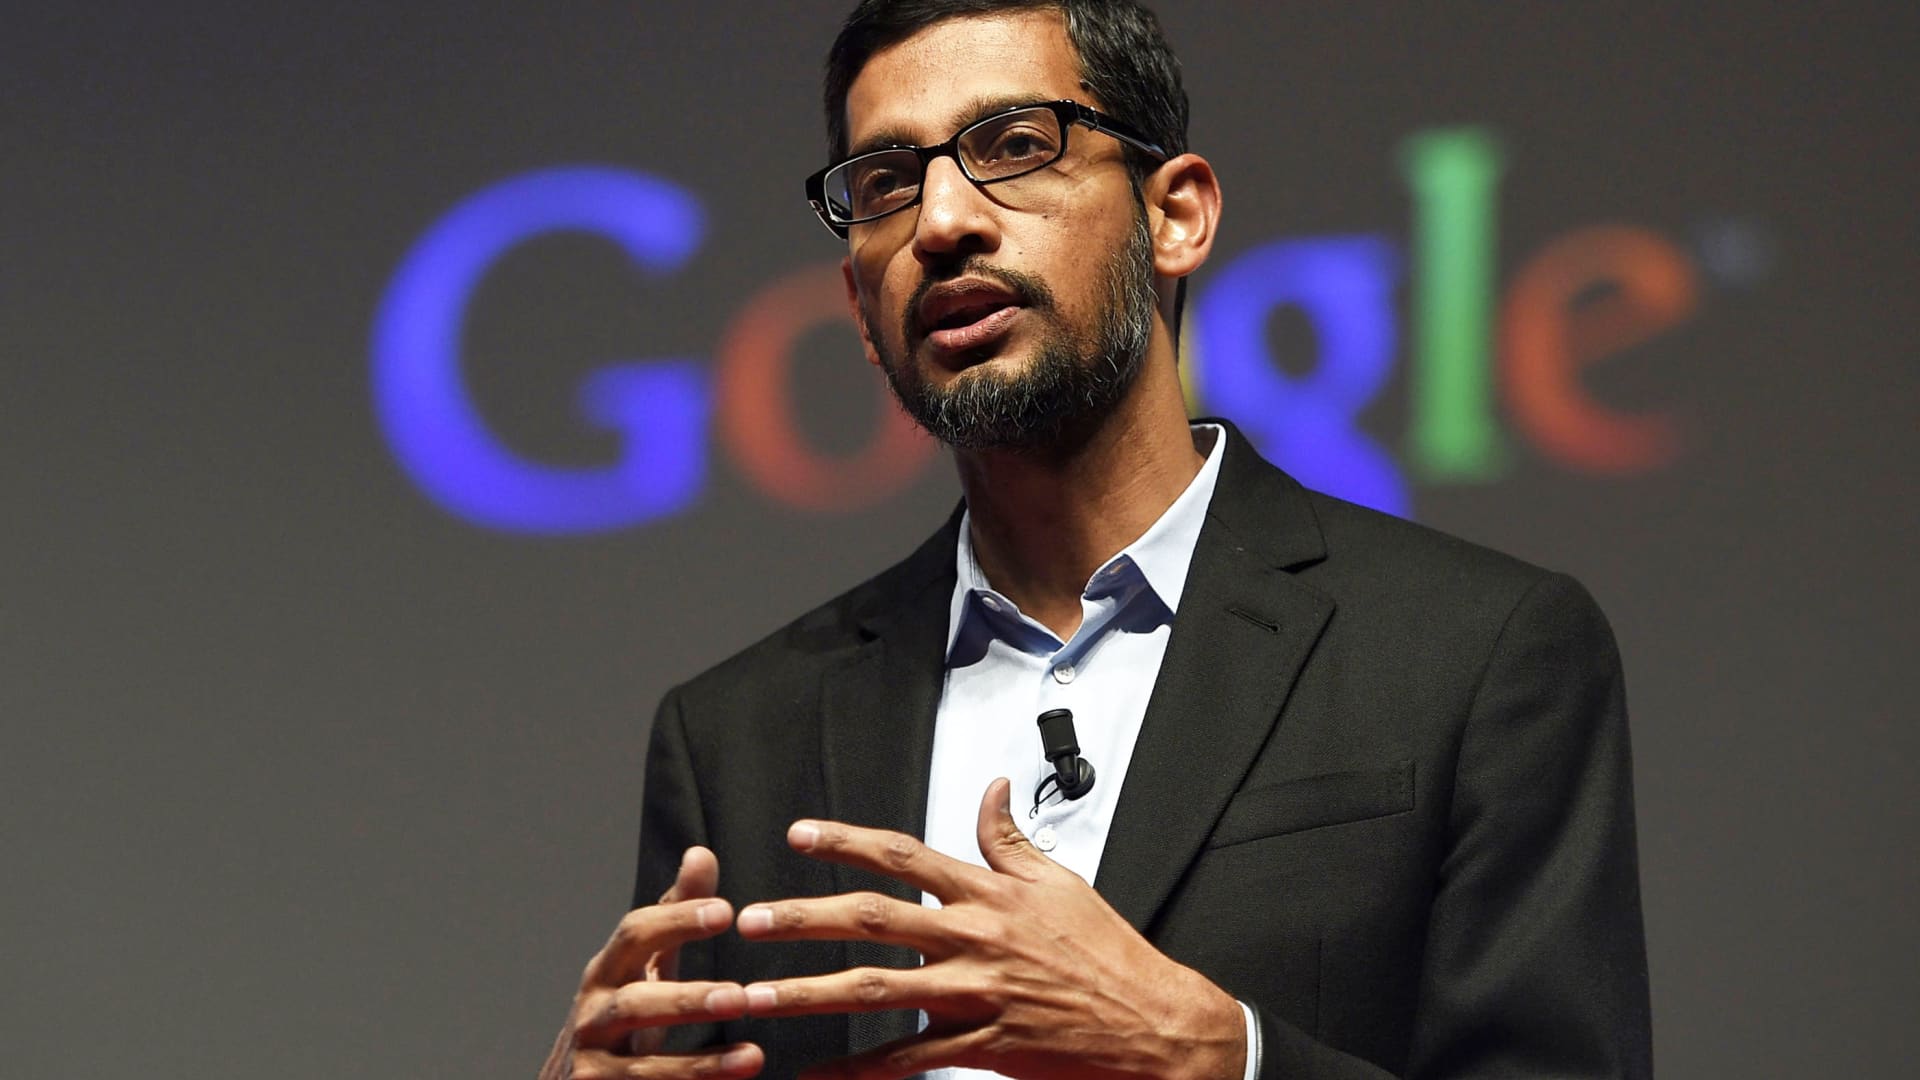 Google CEO defends layoff process in heated town hall Monday